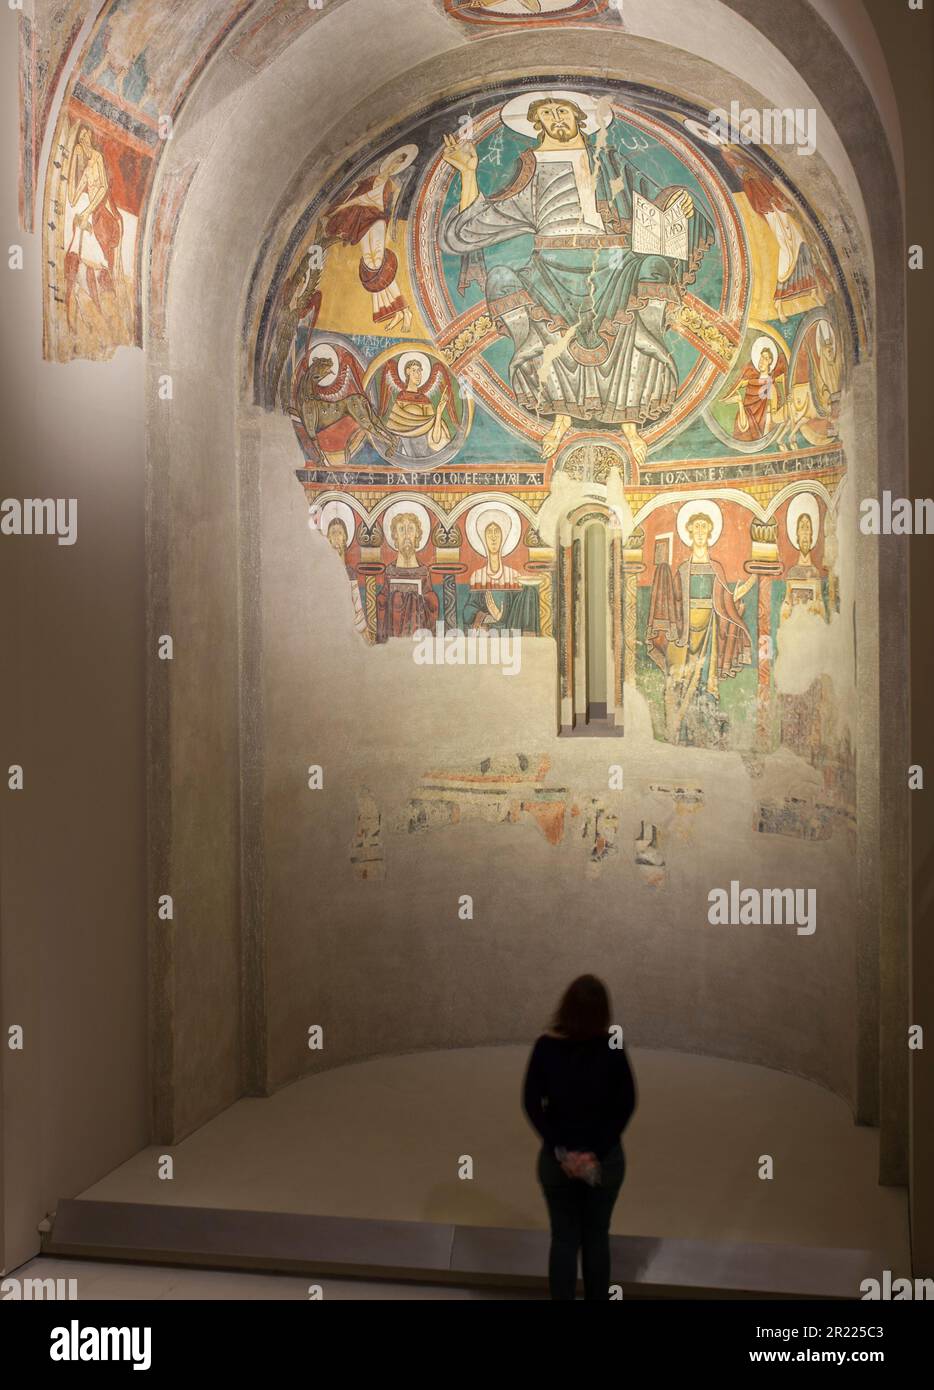 Barcelona, Spain - Dec 26th 2019: Visitor woman observing apse of Sant Climent de Taull at National Art Museum of Catalonia, Barcelona, Spain Stock Photo